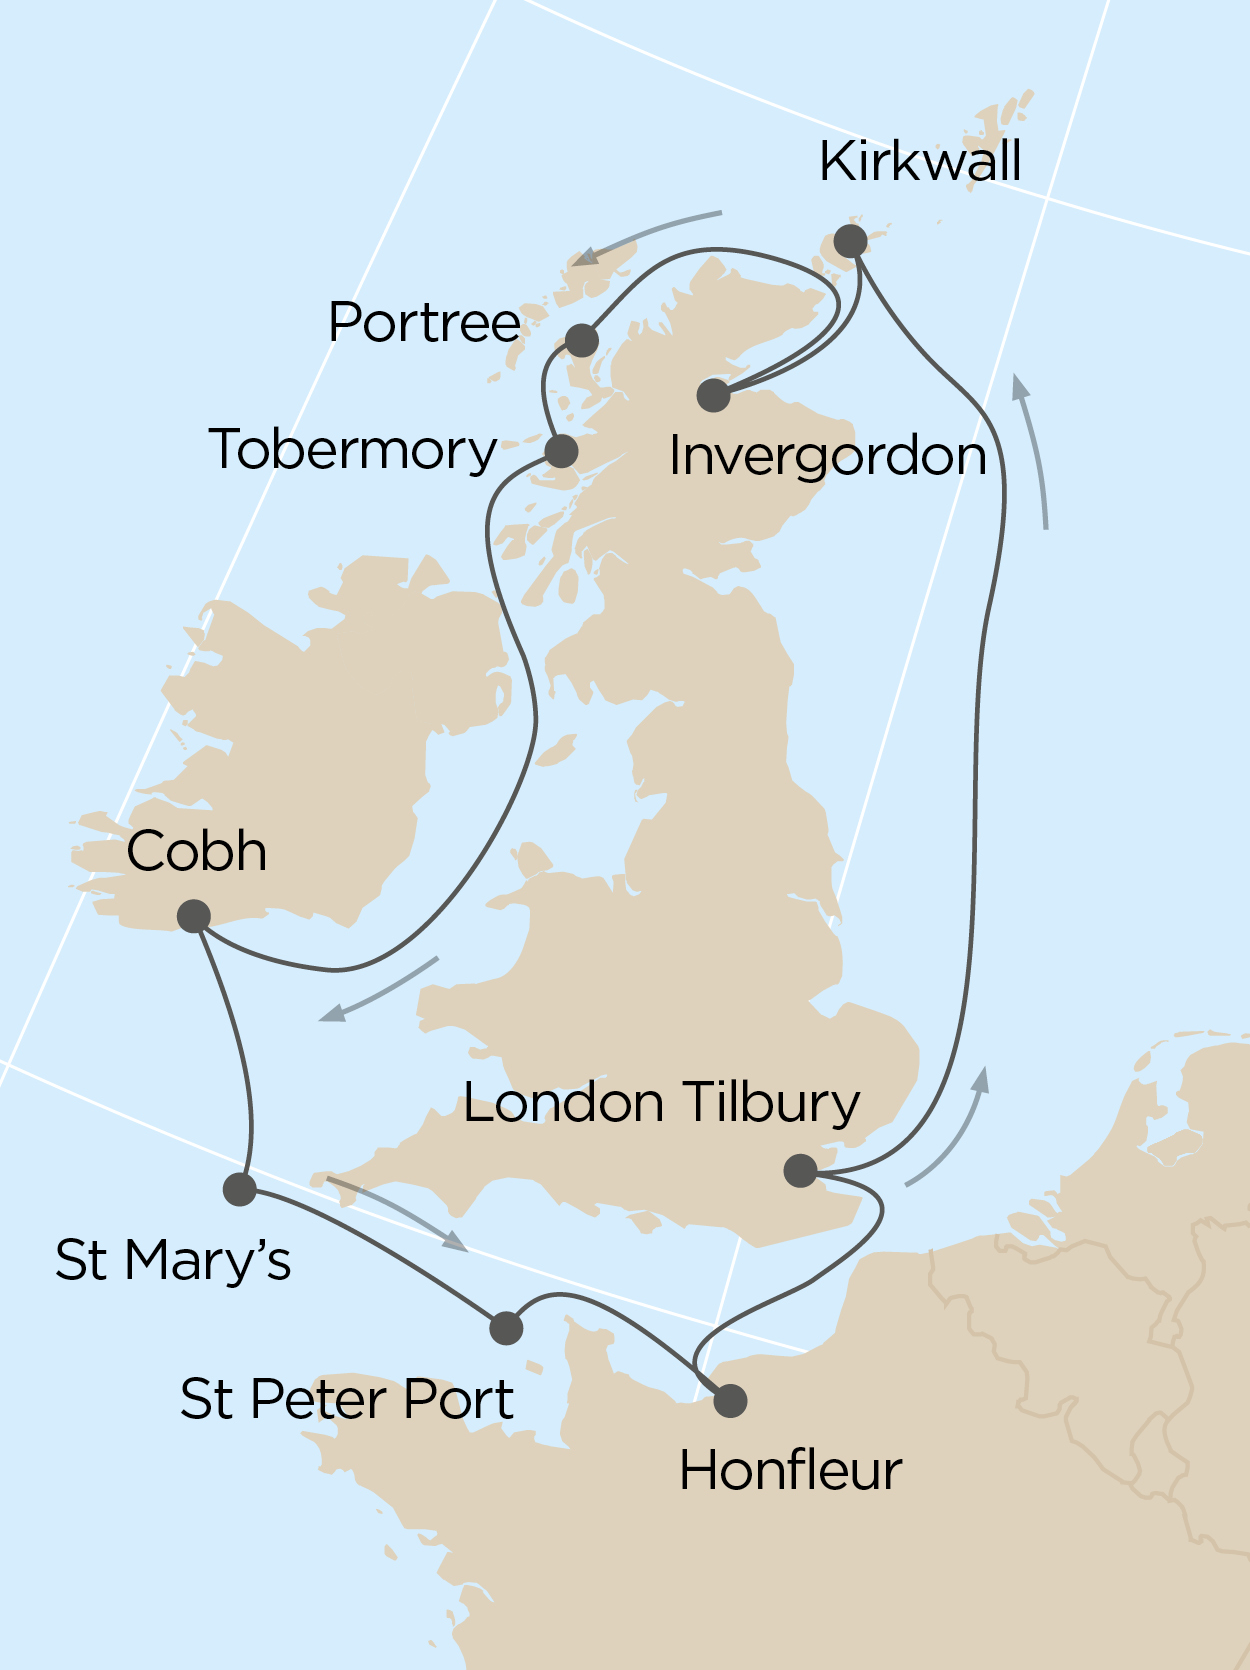 British Isles Discovery Cruise in July Newmarket Holidays